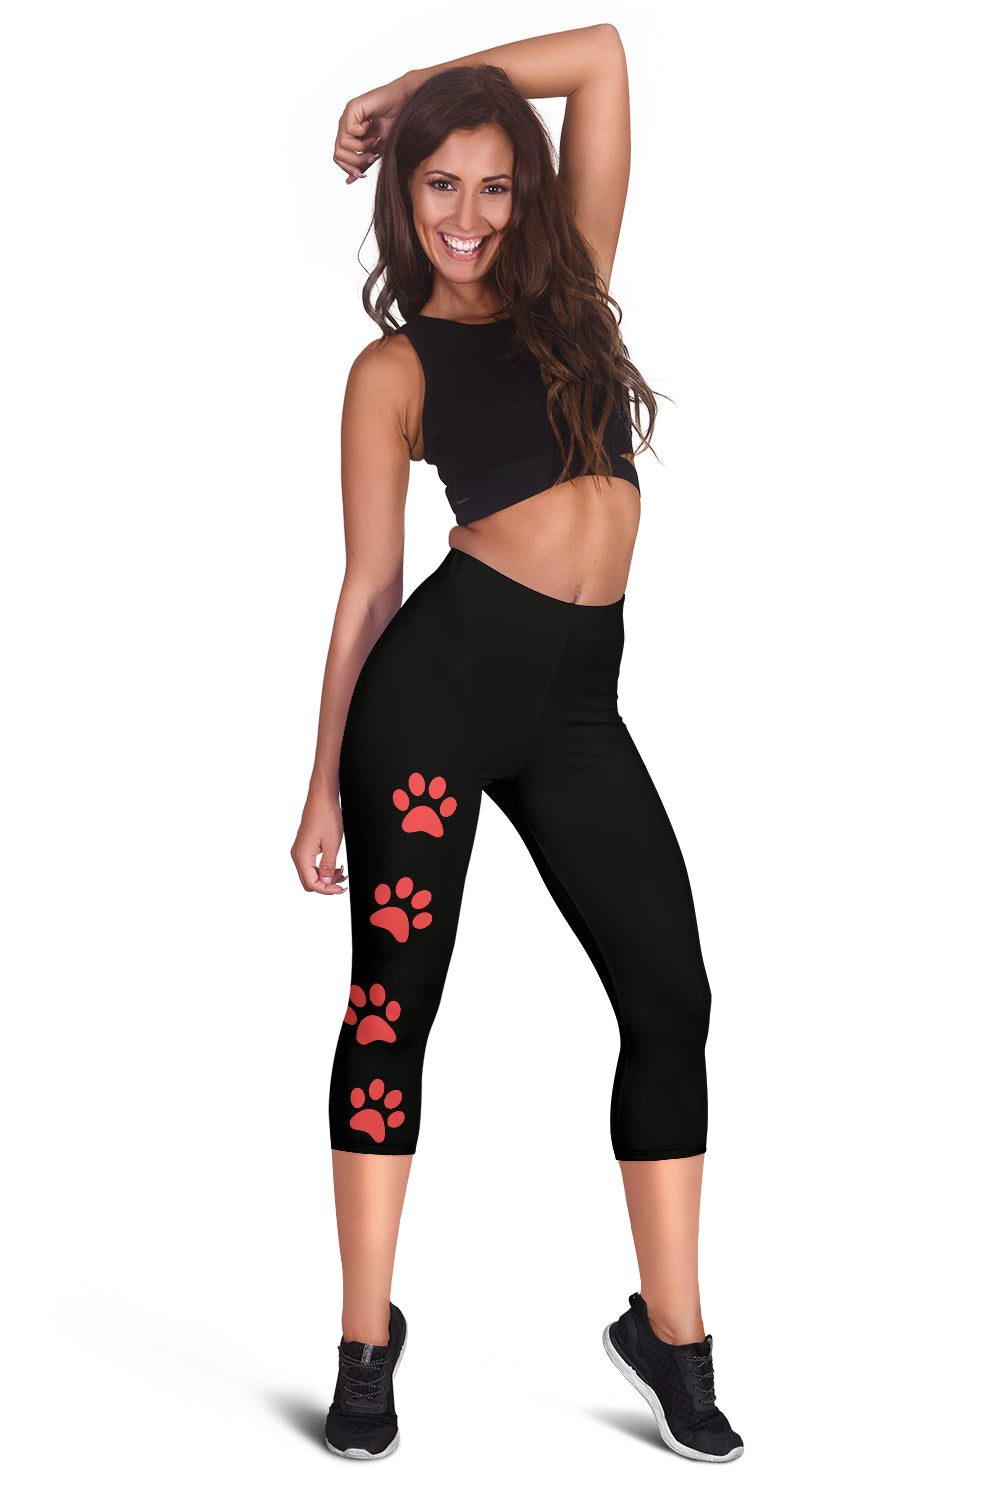 Black With Red Paw Print Women's Capris